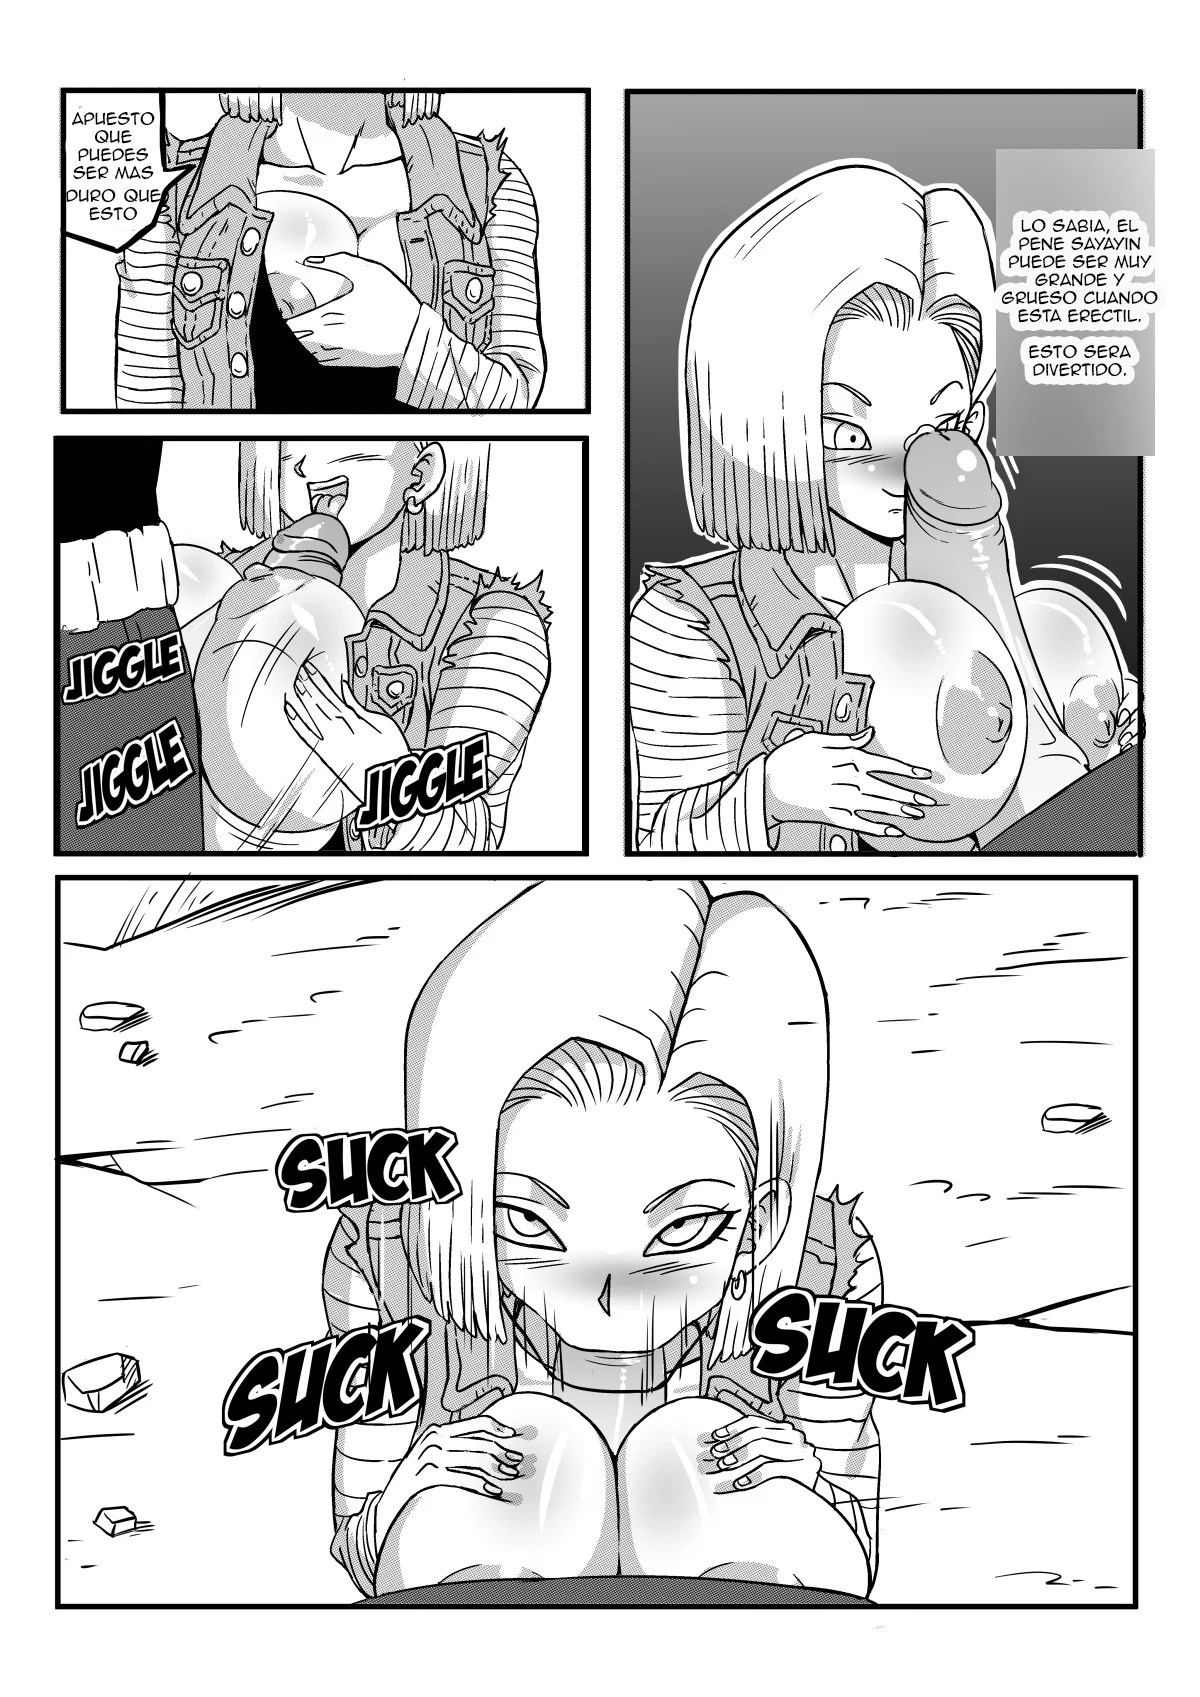 Android 18 Stays in the Future – Pink Pawg - 02059f8d03edac19fe1dcce6a7cb608d